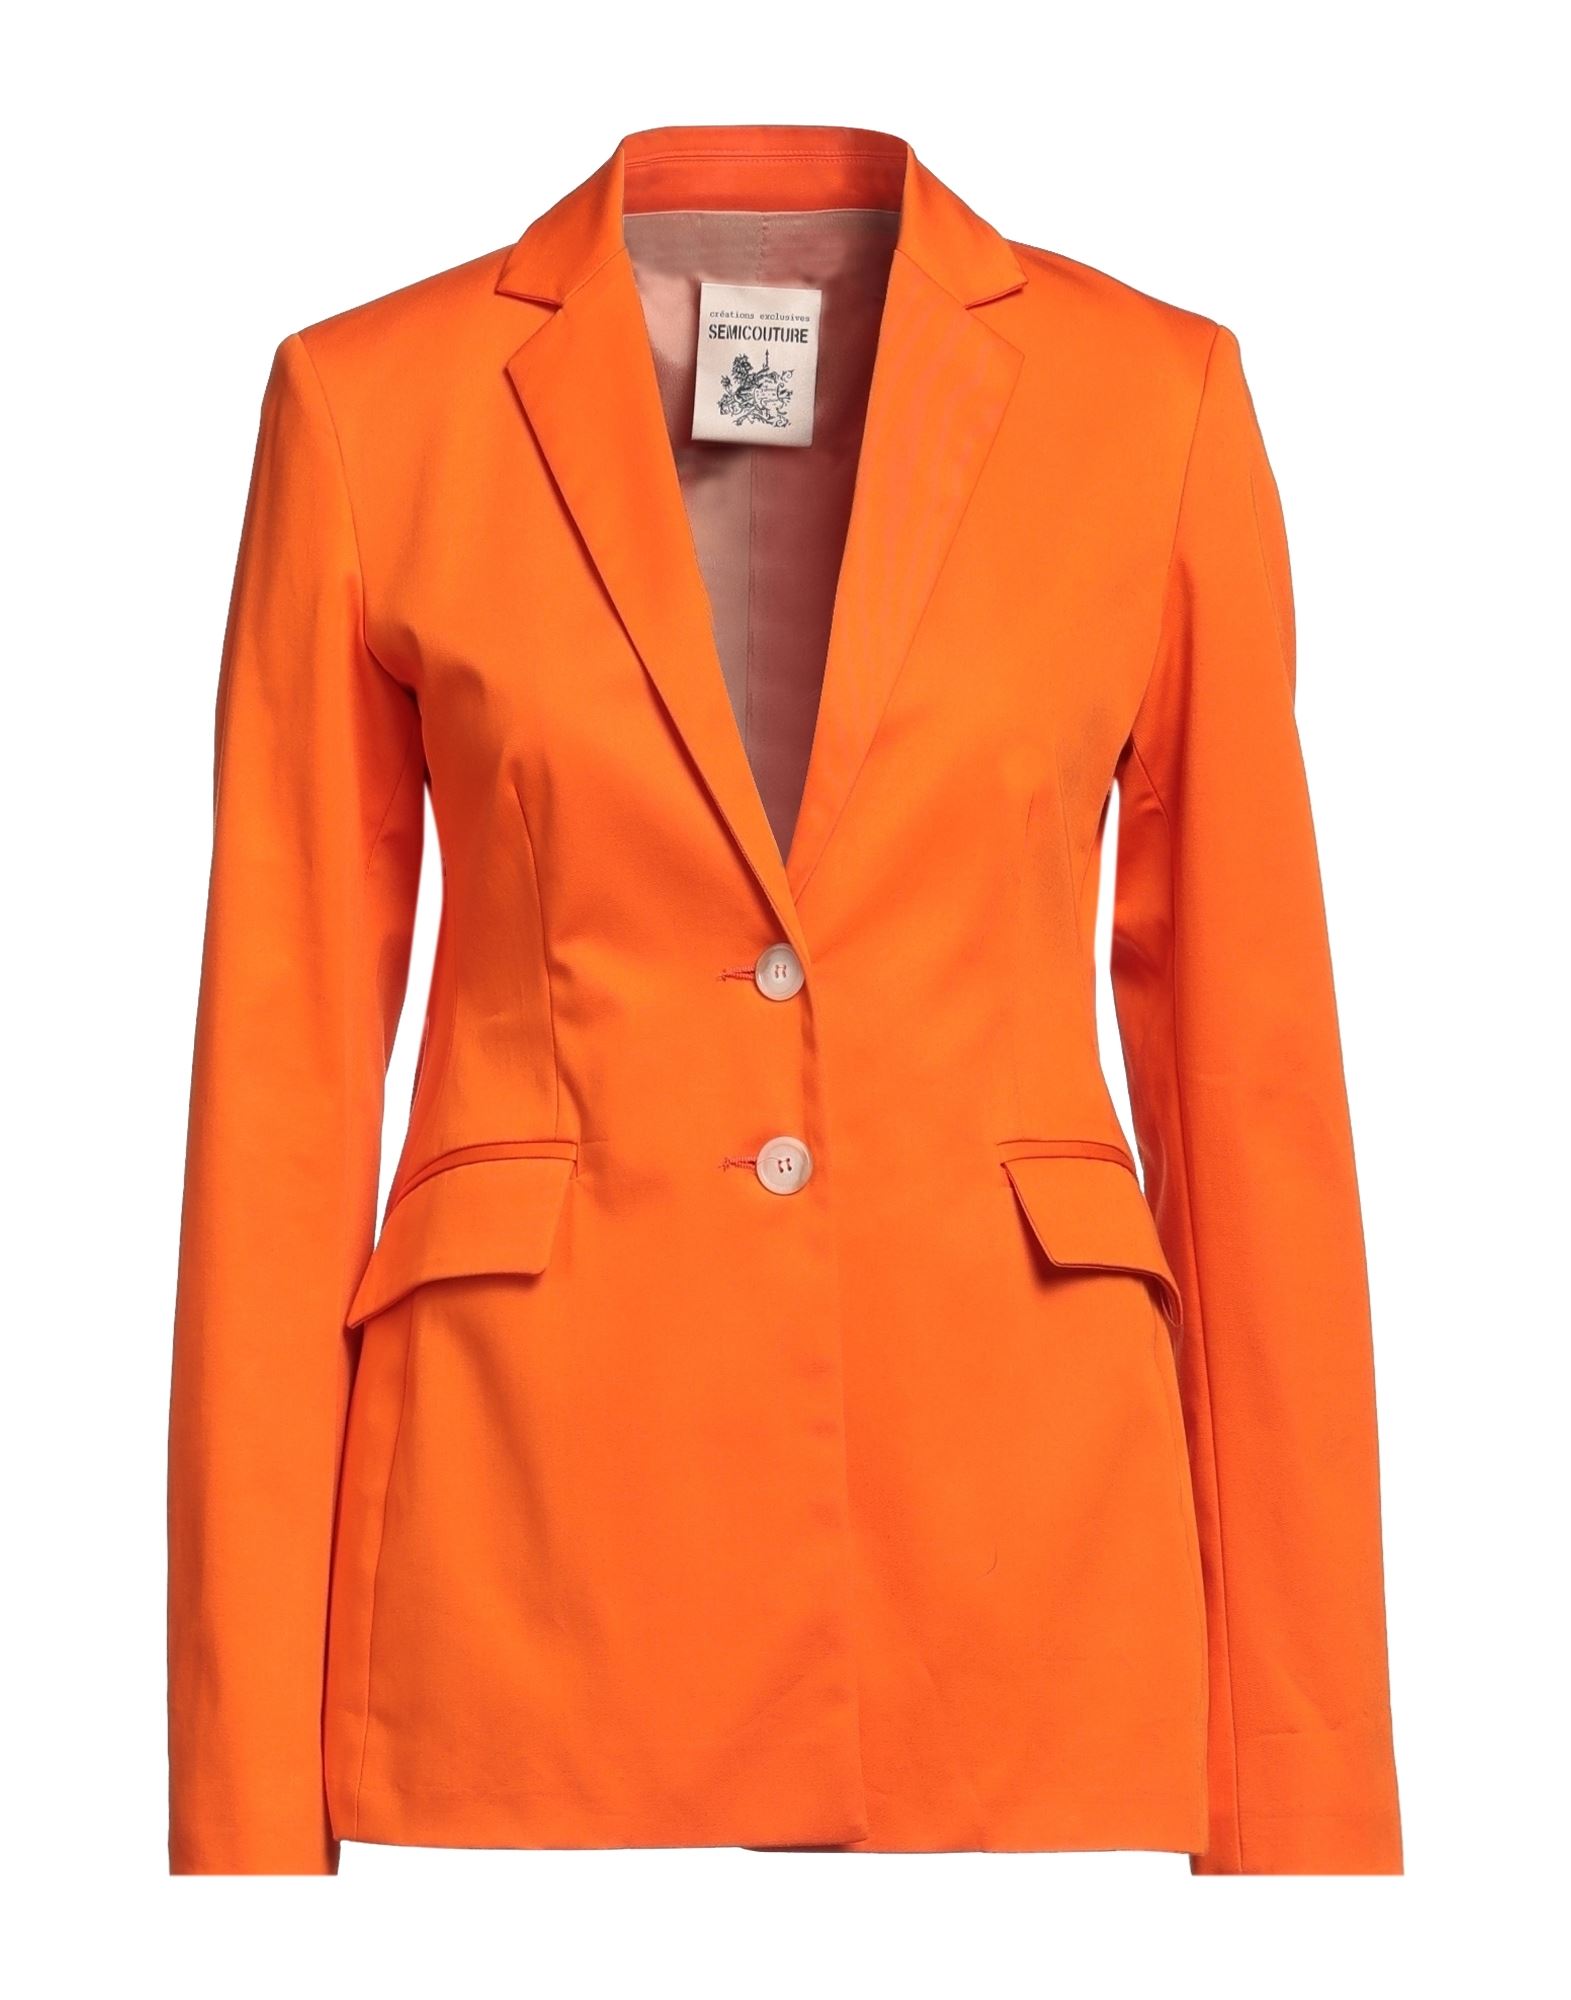 Semicouture Suit Jackets In Orange